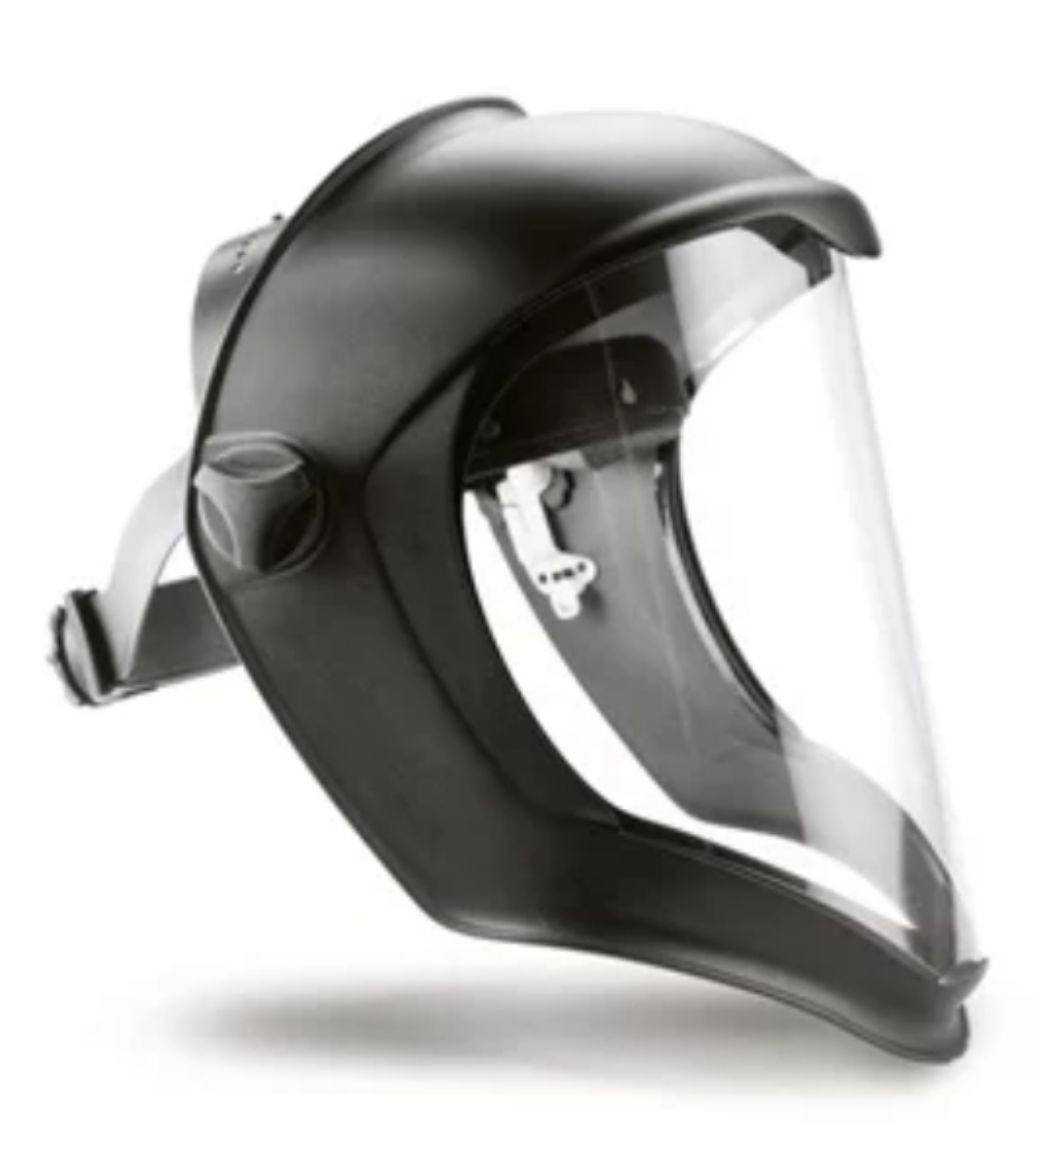 Picture of BIONIC REPLACEMENT VISOR, CLEAR, ABRASION RESISTANT / ANTI-FOG